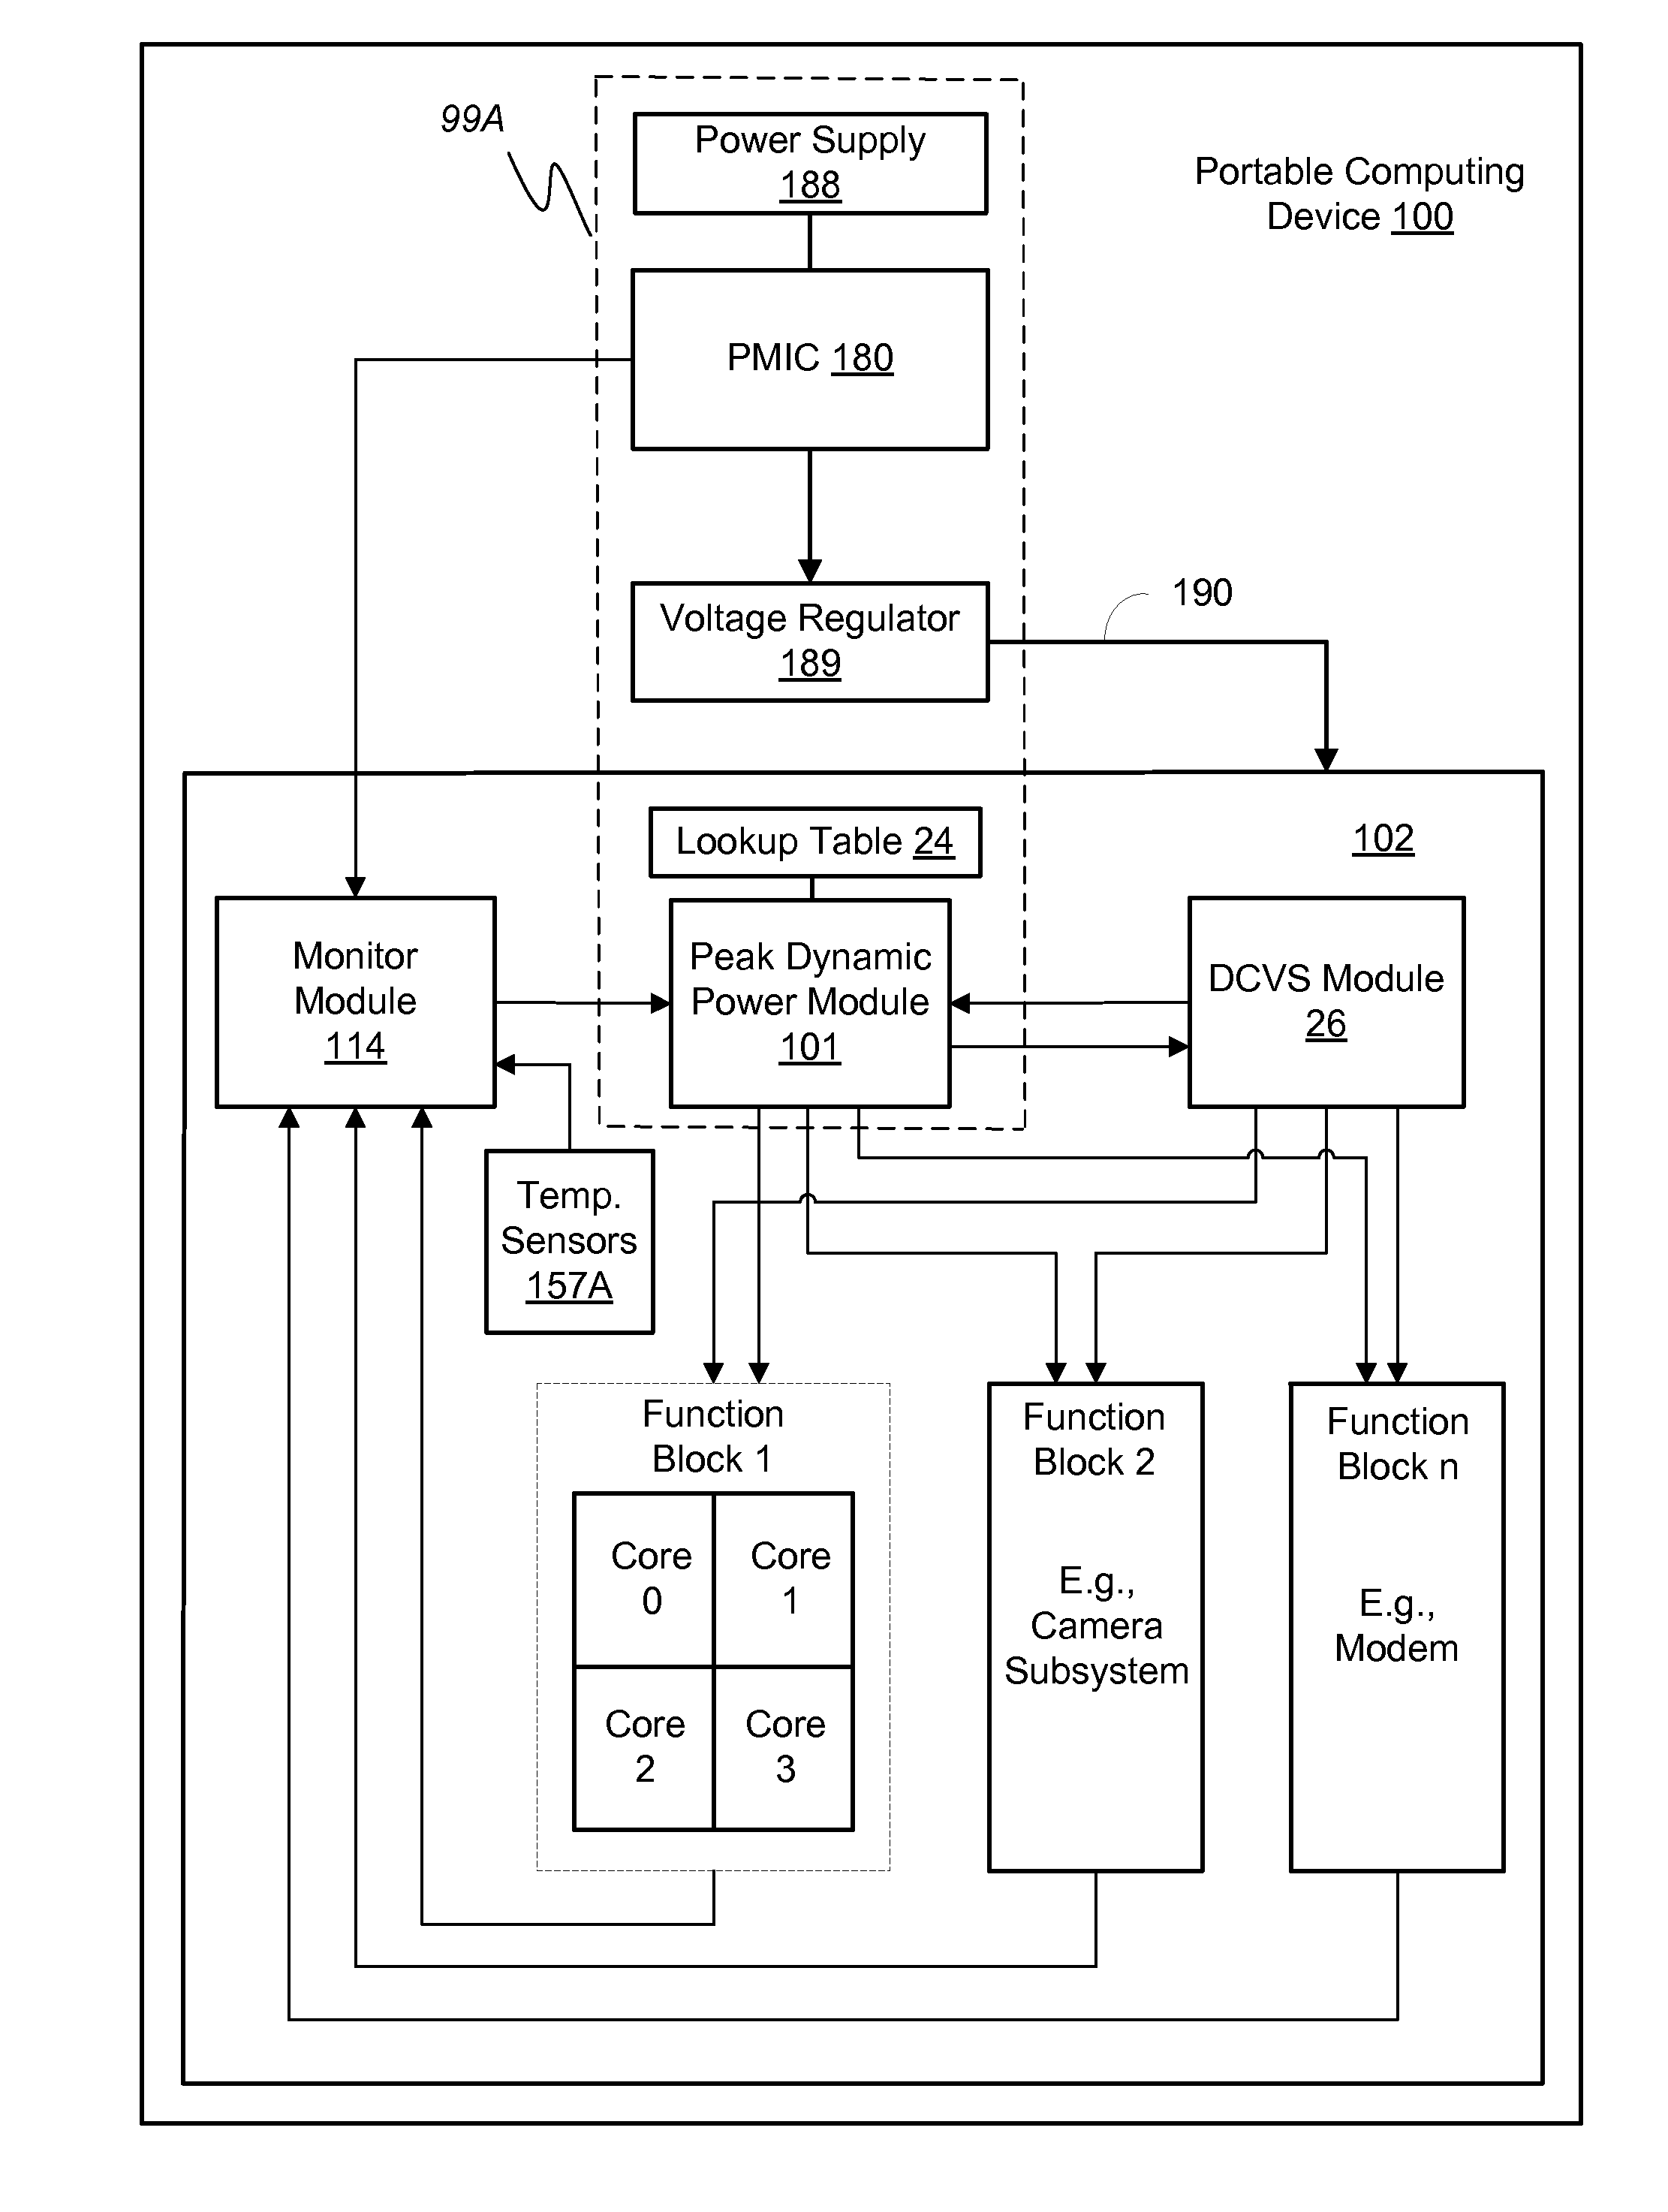 System and method for peak dynamic power management in a portable computing device